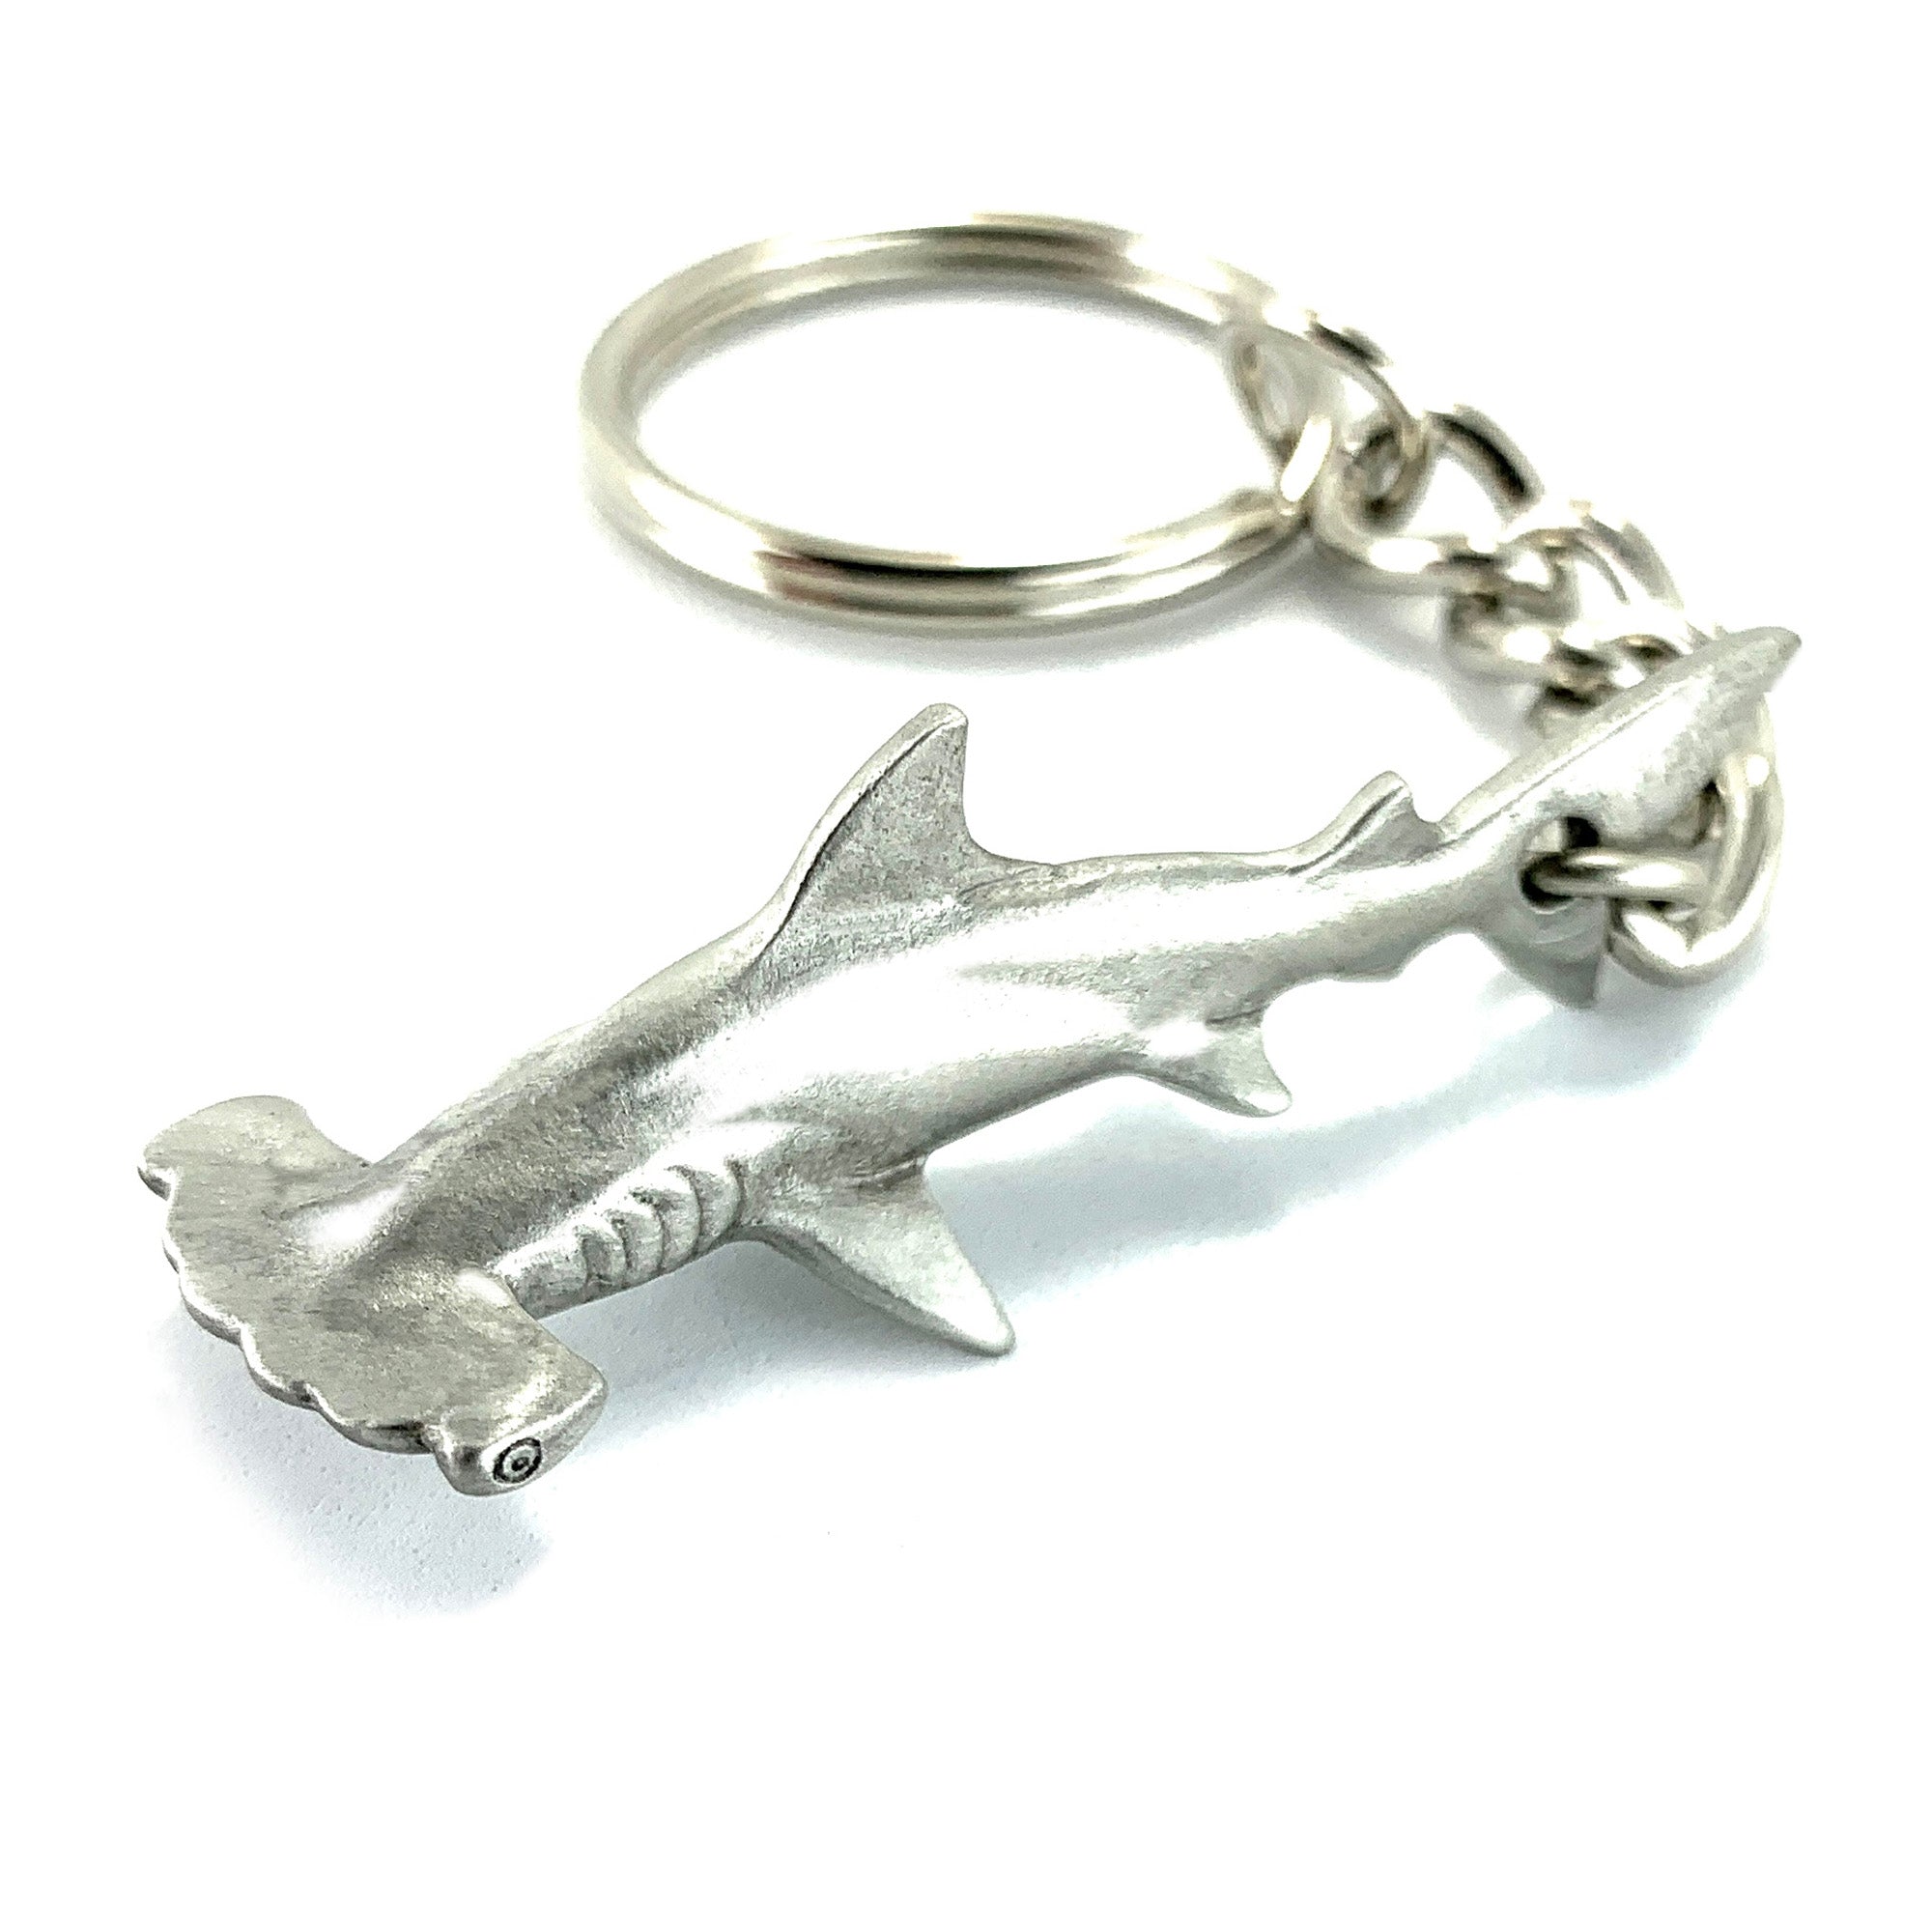  Checkered Racing Flags Charm Car Keychain a Great